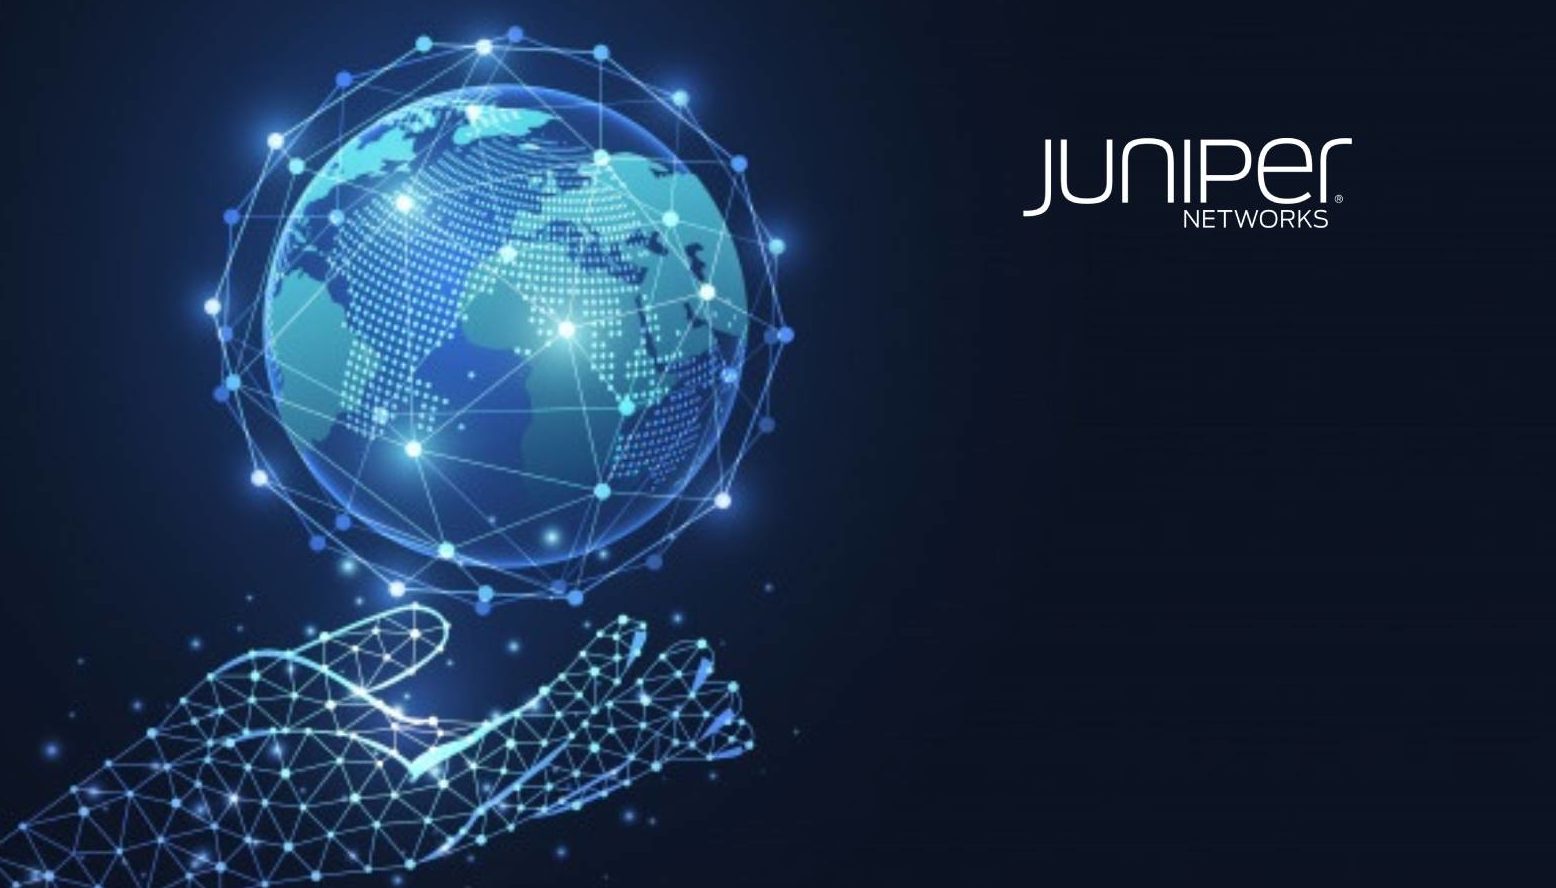 MDSi Partners with Juniper Networks To Deliver New Diversity